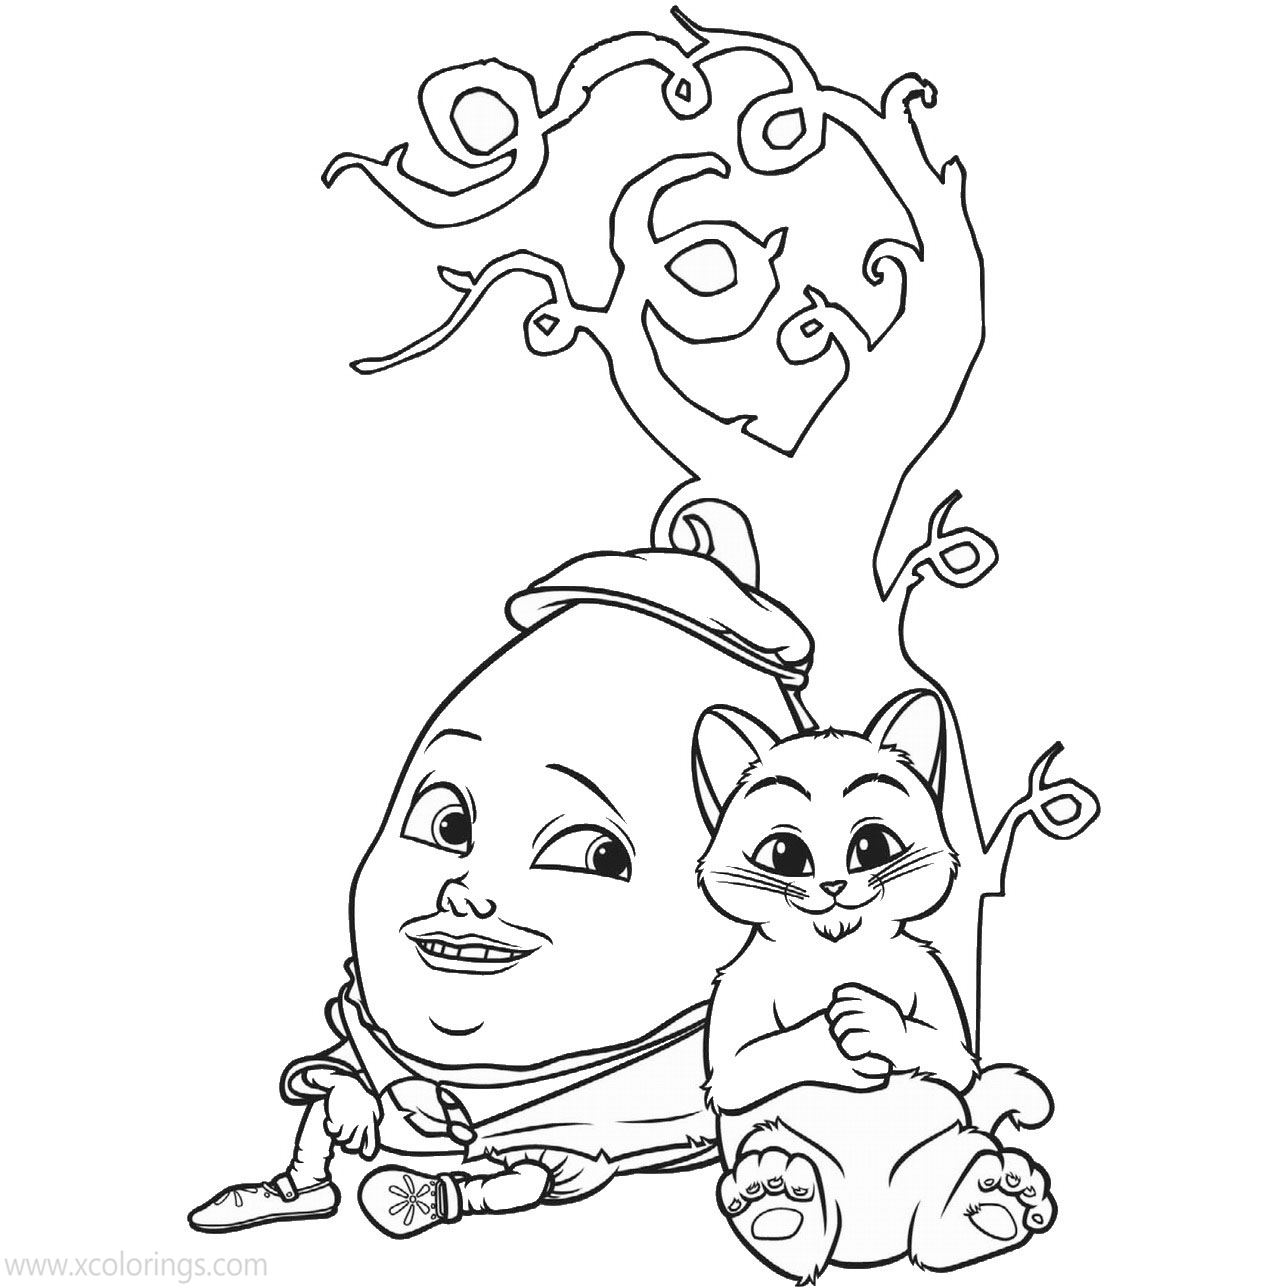 Free Puss in Boots Coloring Pages Kitty and Humpty Dumpty Under the Tree printable